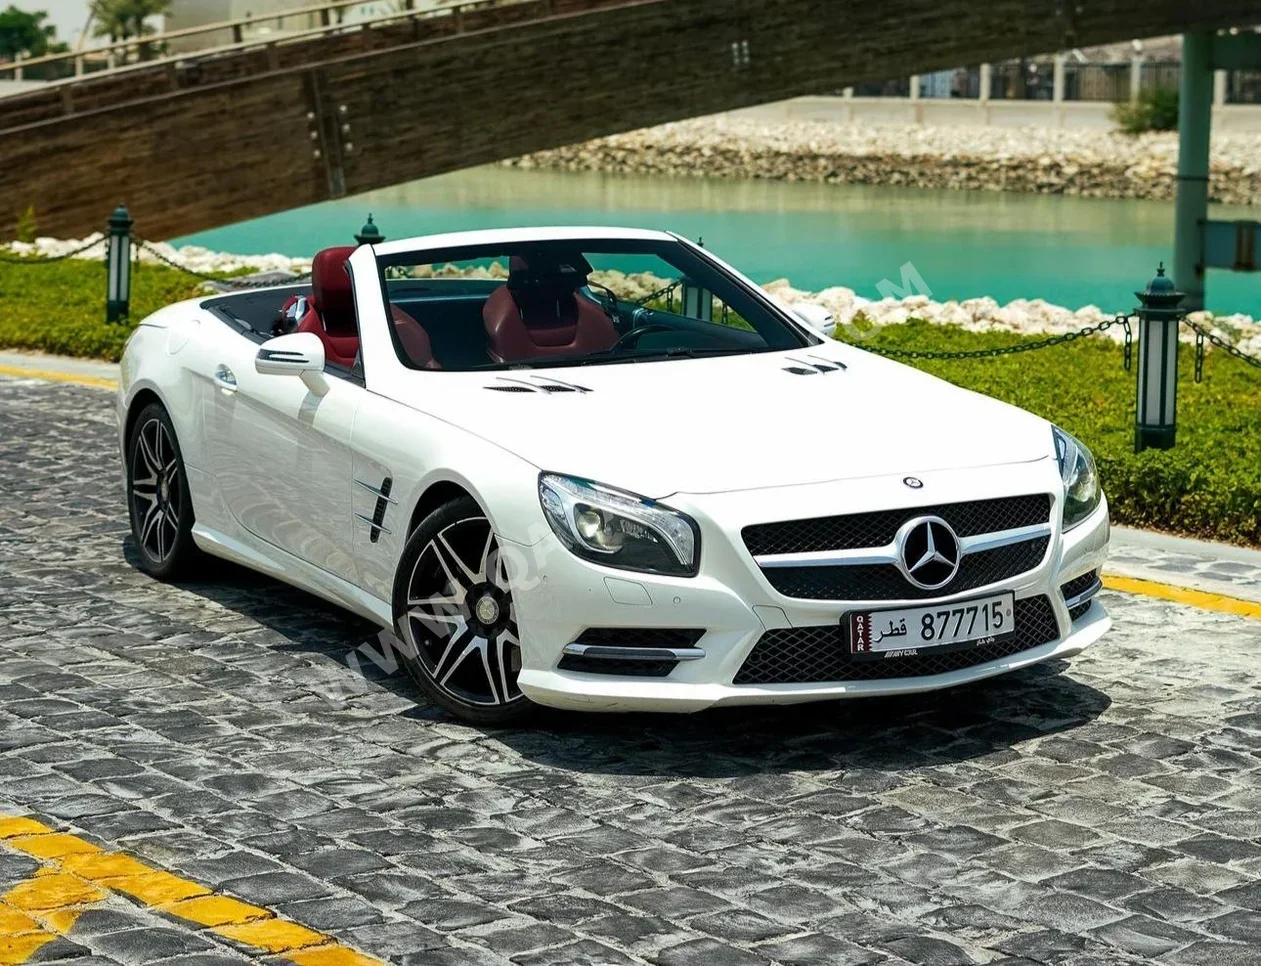 Mercedes-Benz  SL  500  2015  Automatic  80,000 Km  8 Cylinder  Rear Wheel Drive (RWD)  Coupe / Sport  White